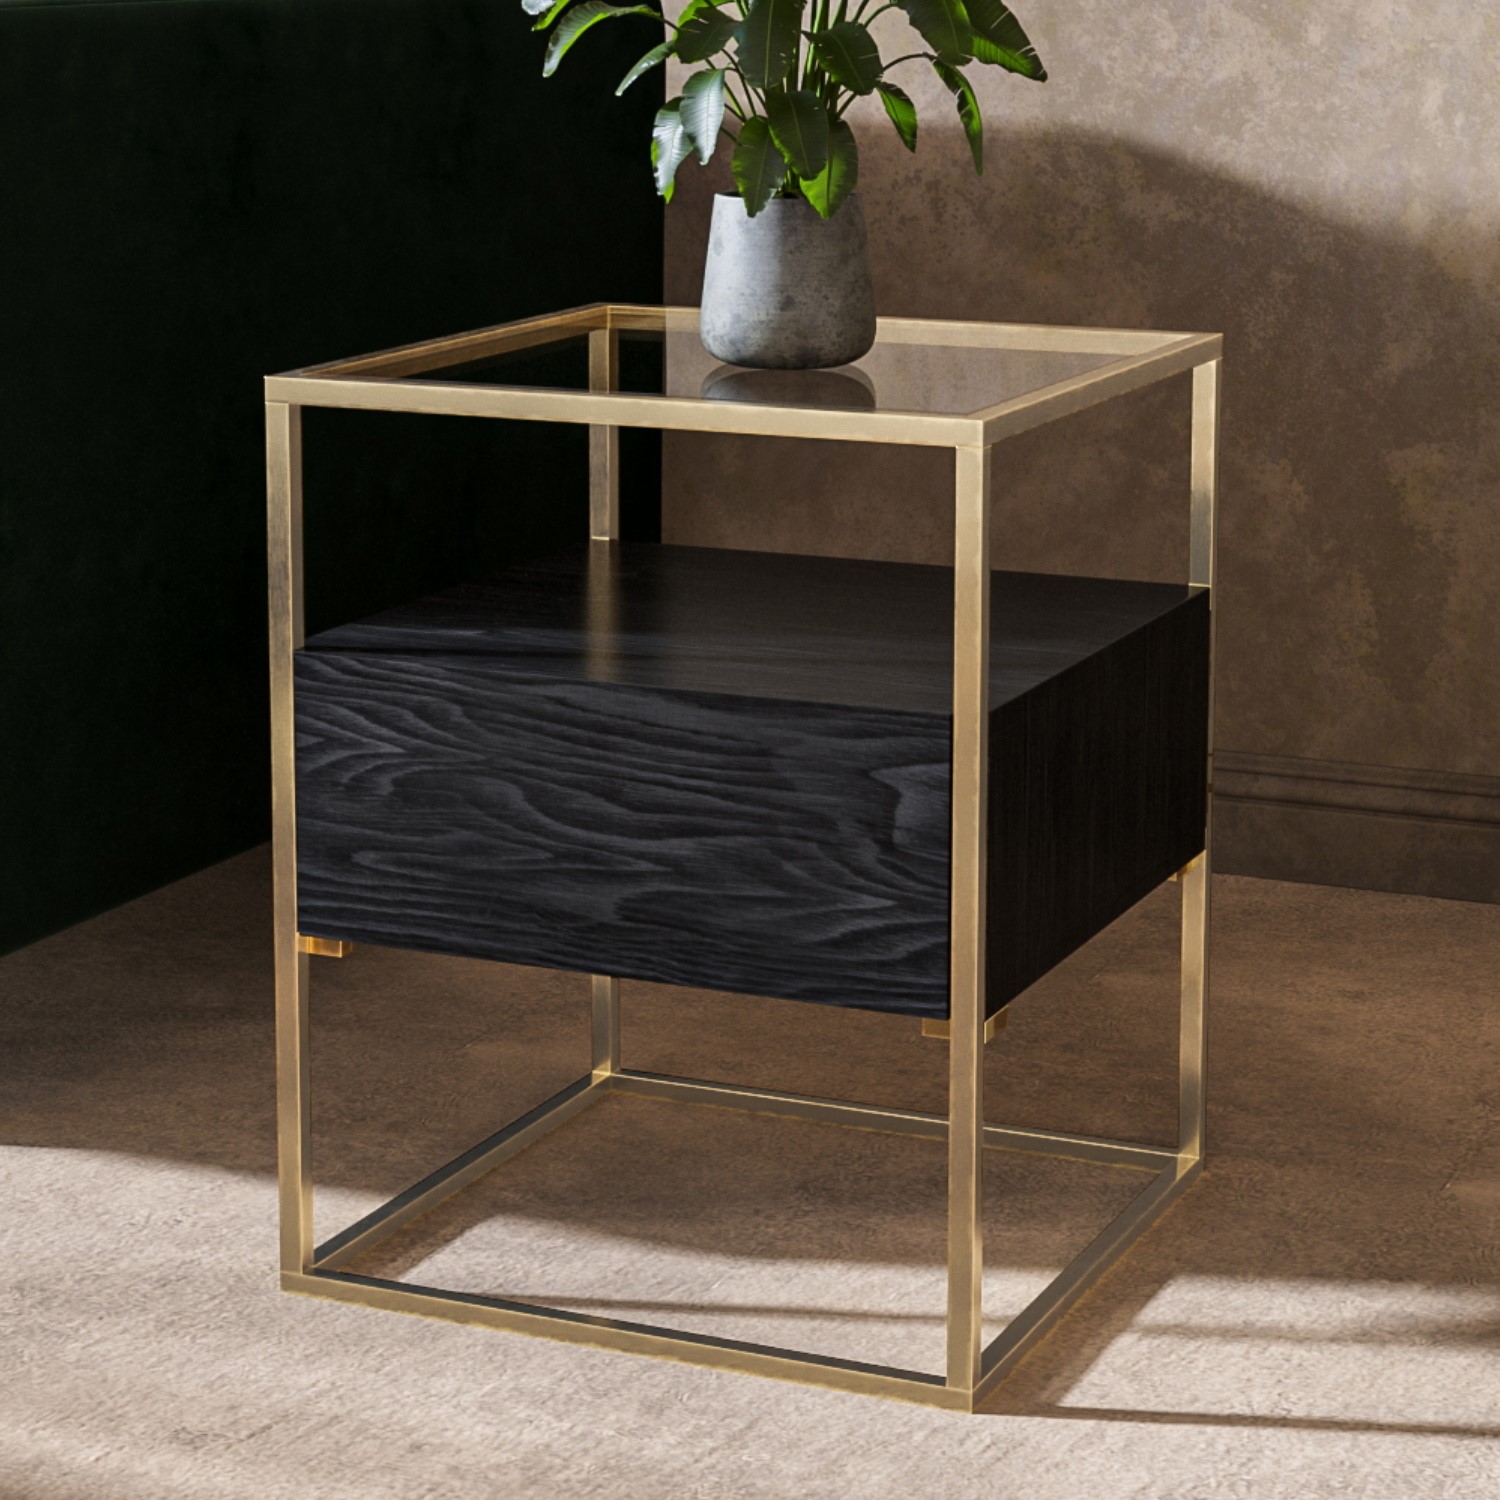 Photo of Black side table with glass top and storage drawers - akila